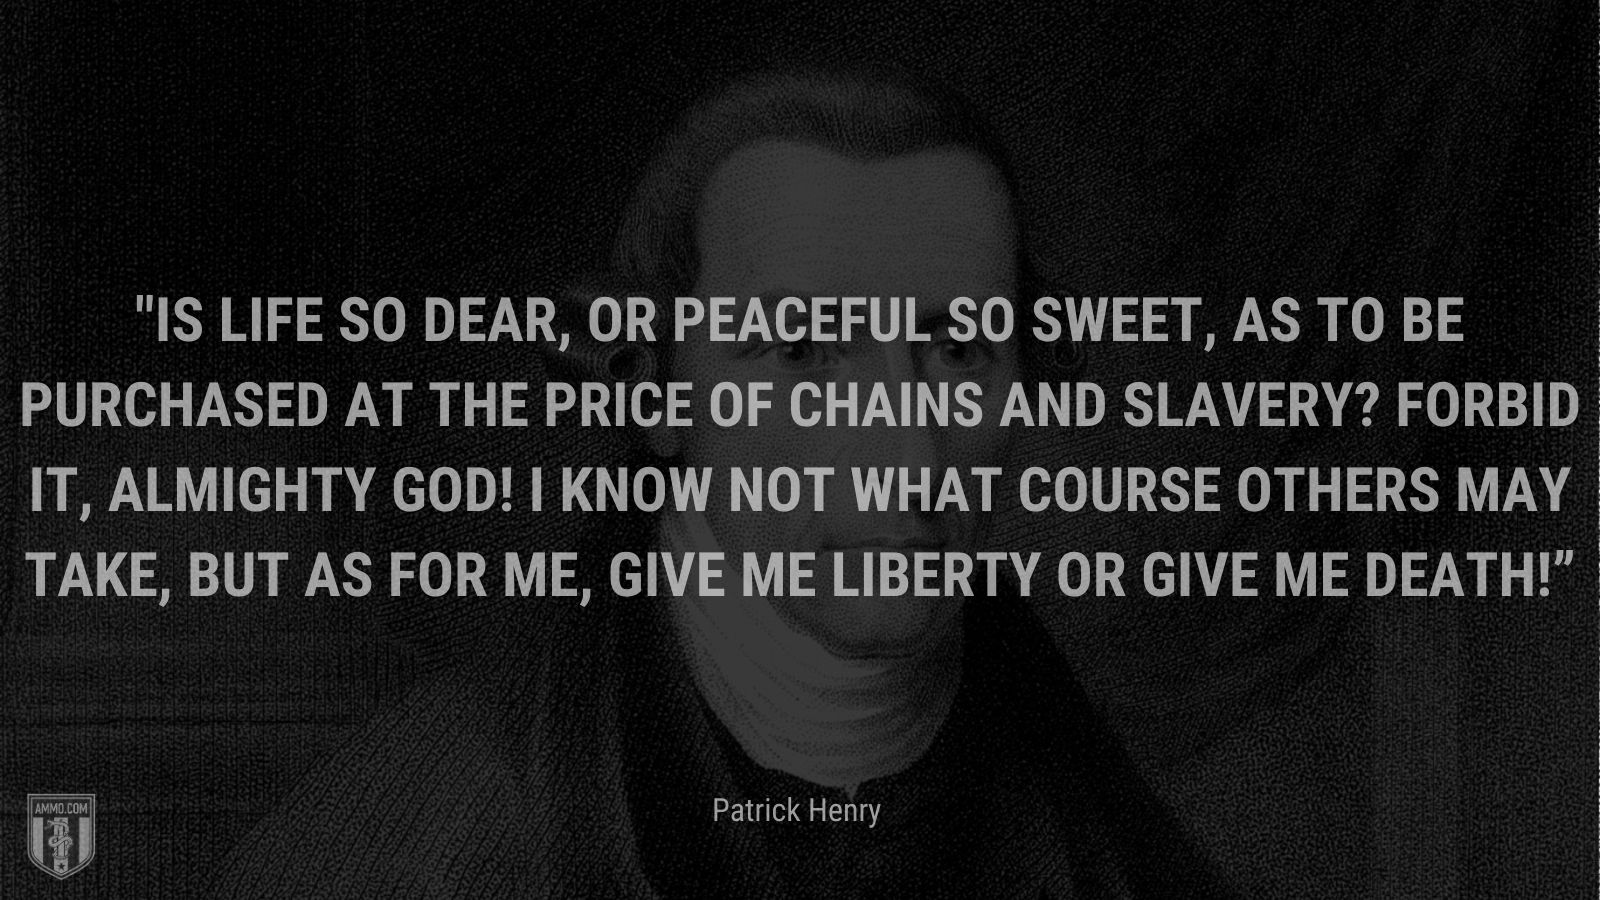 “Is life so dear, or peaceful so sweet, as to be purchased at the price of chains and slavery? Forbid it, Almighty God! I know not what course others may take, but as for me, give me liberty or give me death!” - Patrick Henry